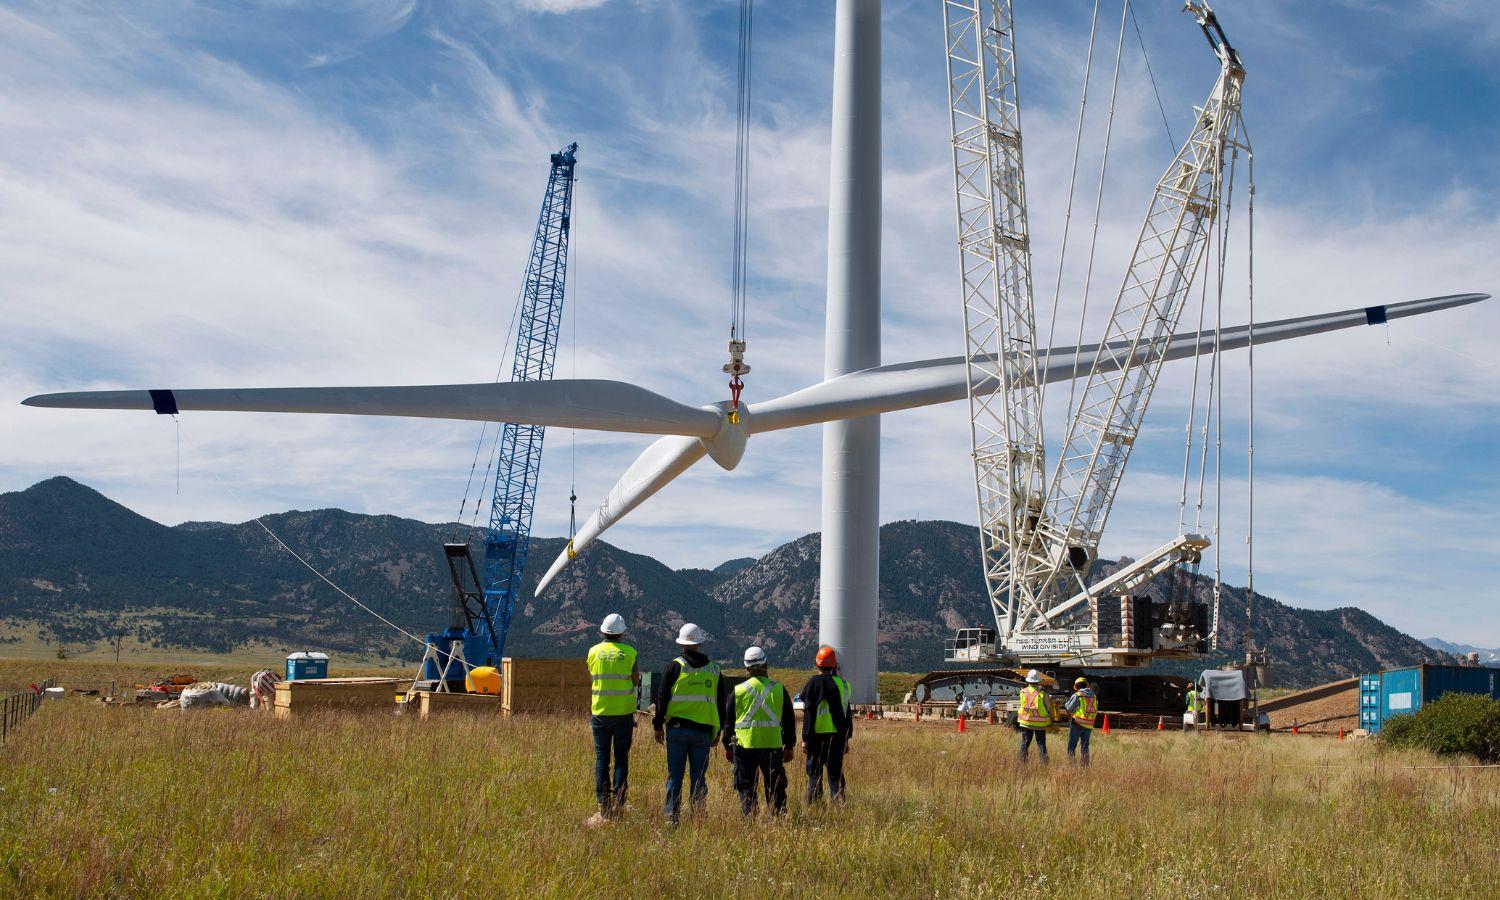 A wind turbine being assembled by a crew of workers.